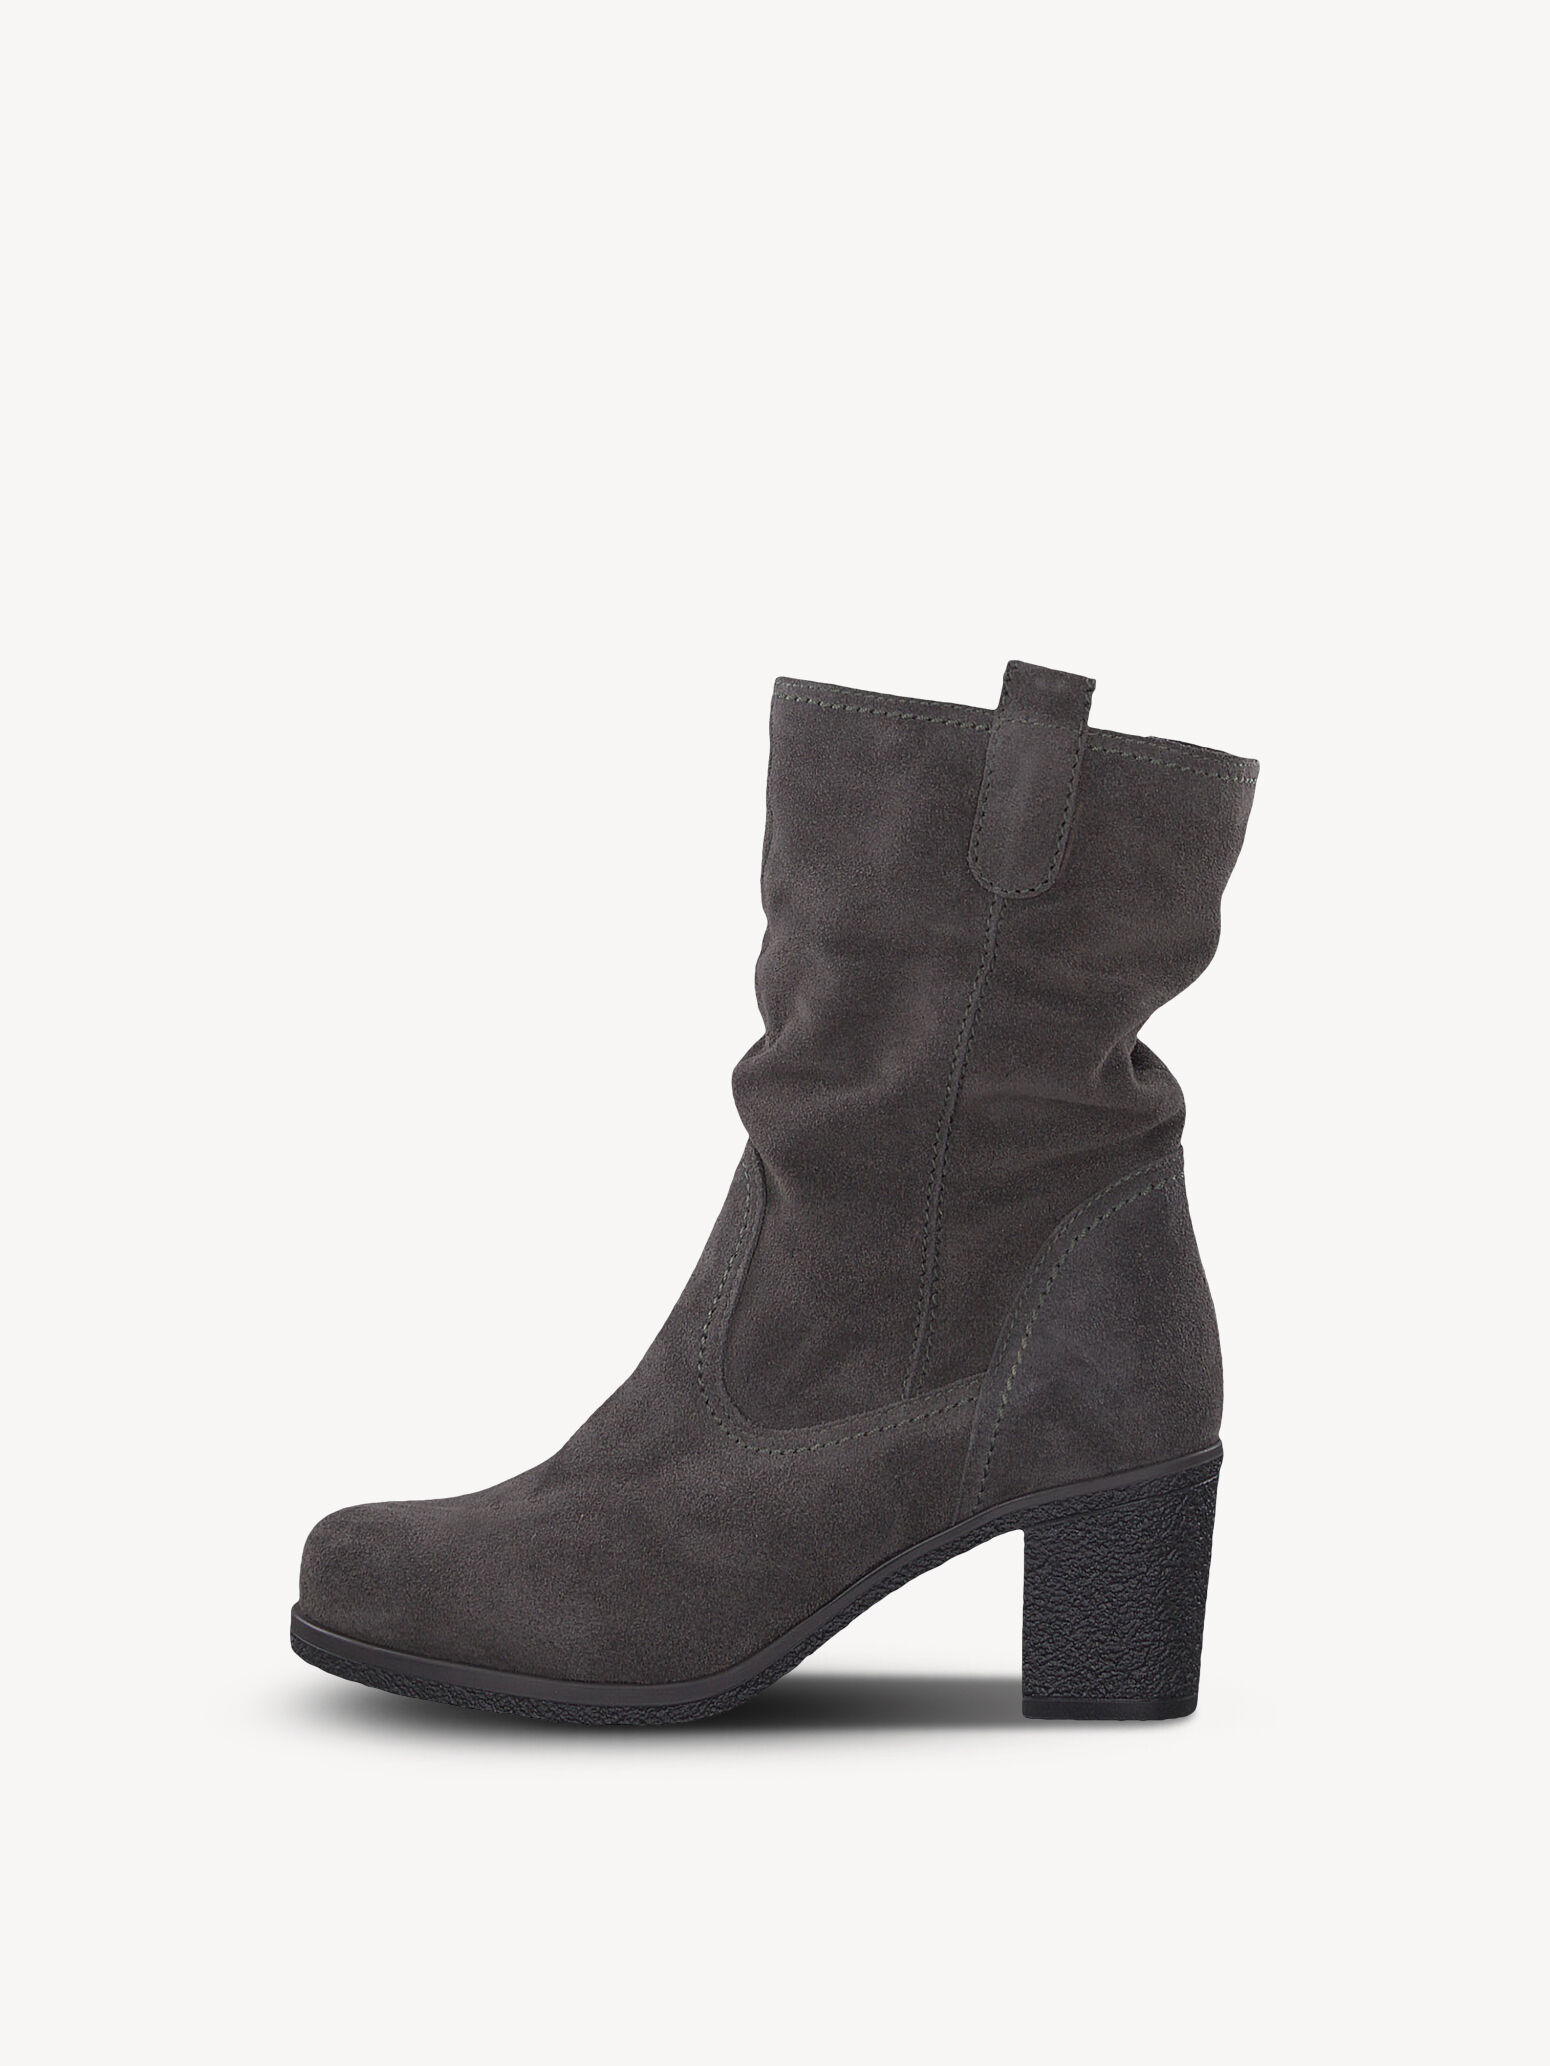 grey leather bootie